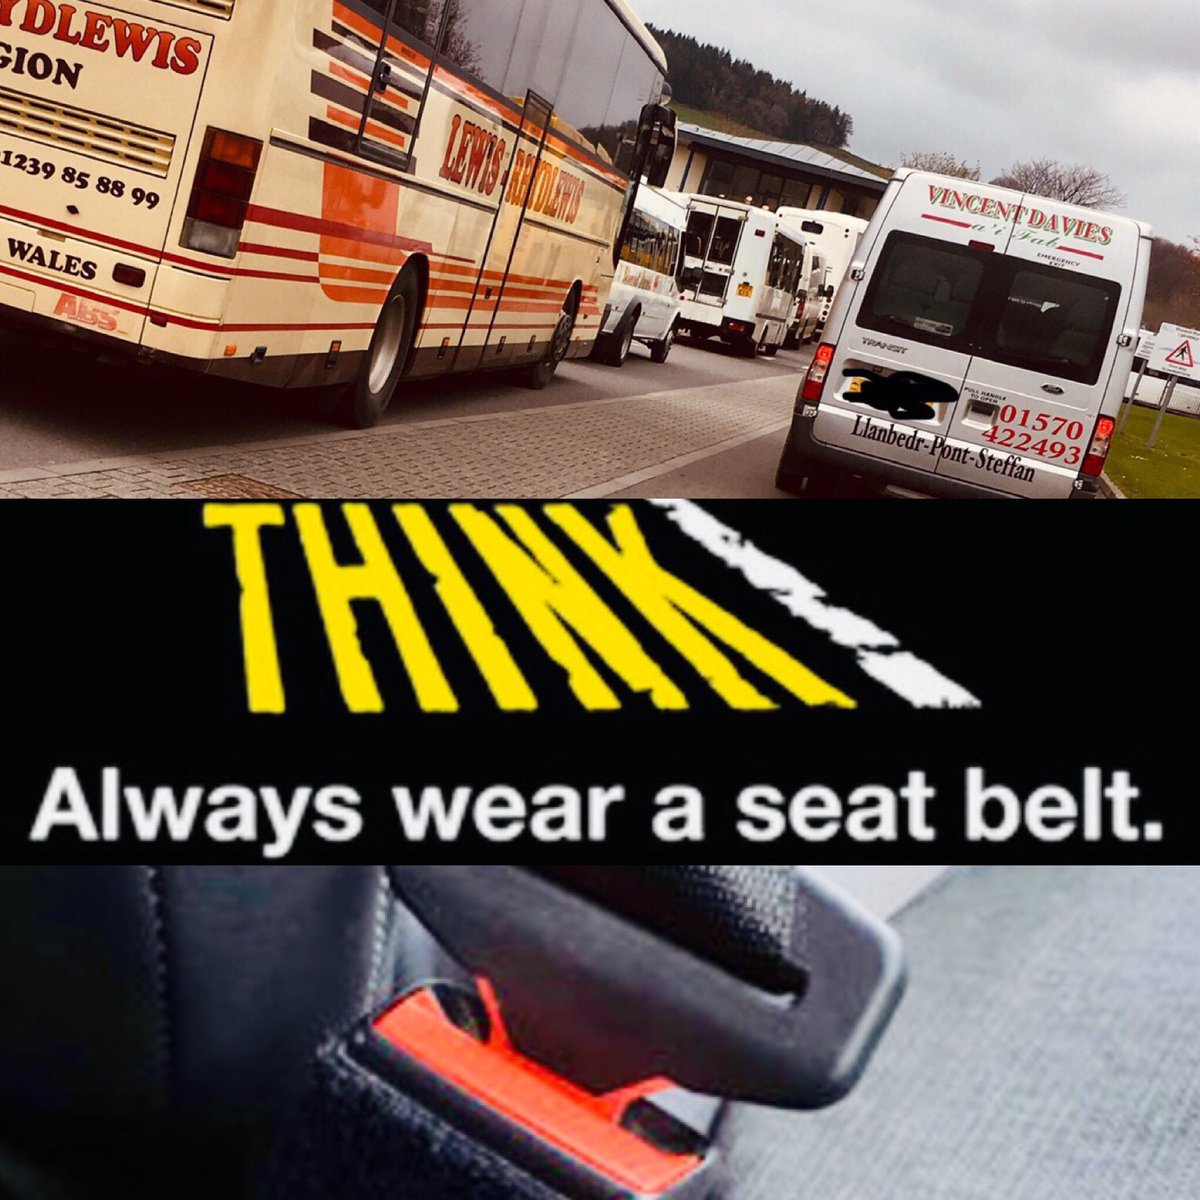 PCSO Shanice and School Officer PC Hannah have done seatbelt checks on school buses during
The All Wales Seatbelt Campaign
🚌⚠️👮🏻‍♀️ #fatal5 #beltup